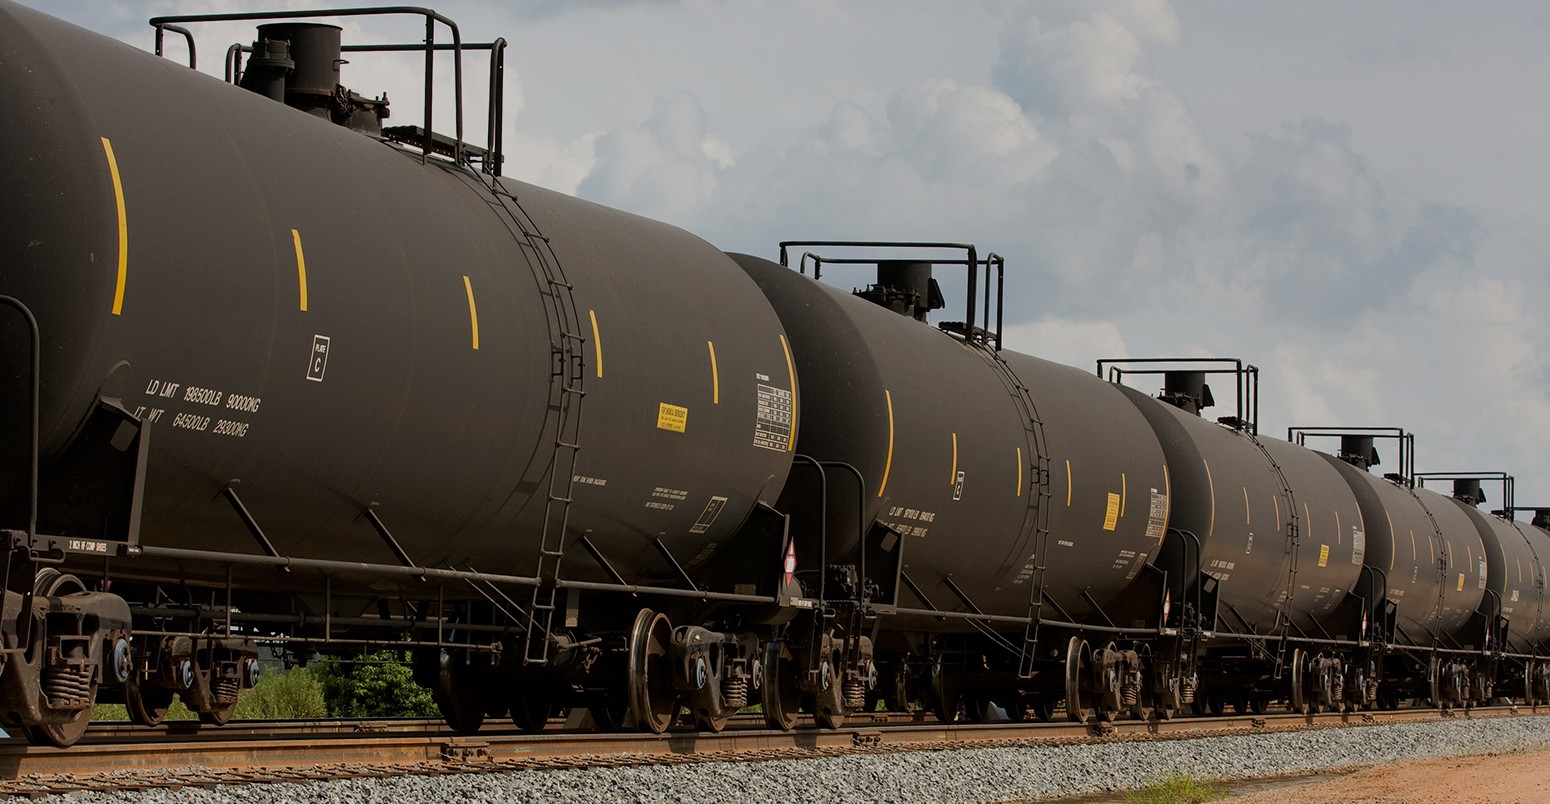 Railroad train of tanker cars transporting crude oil on the tracks.